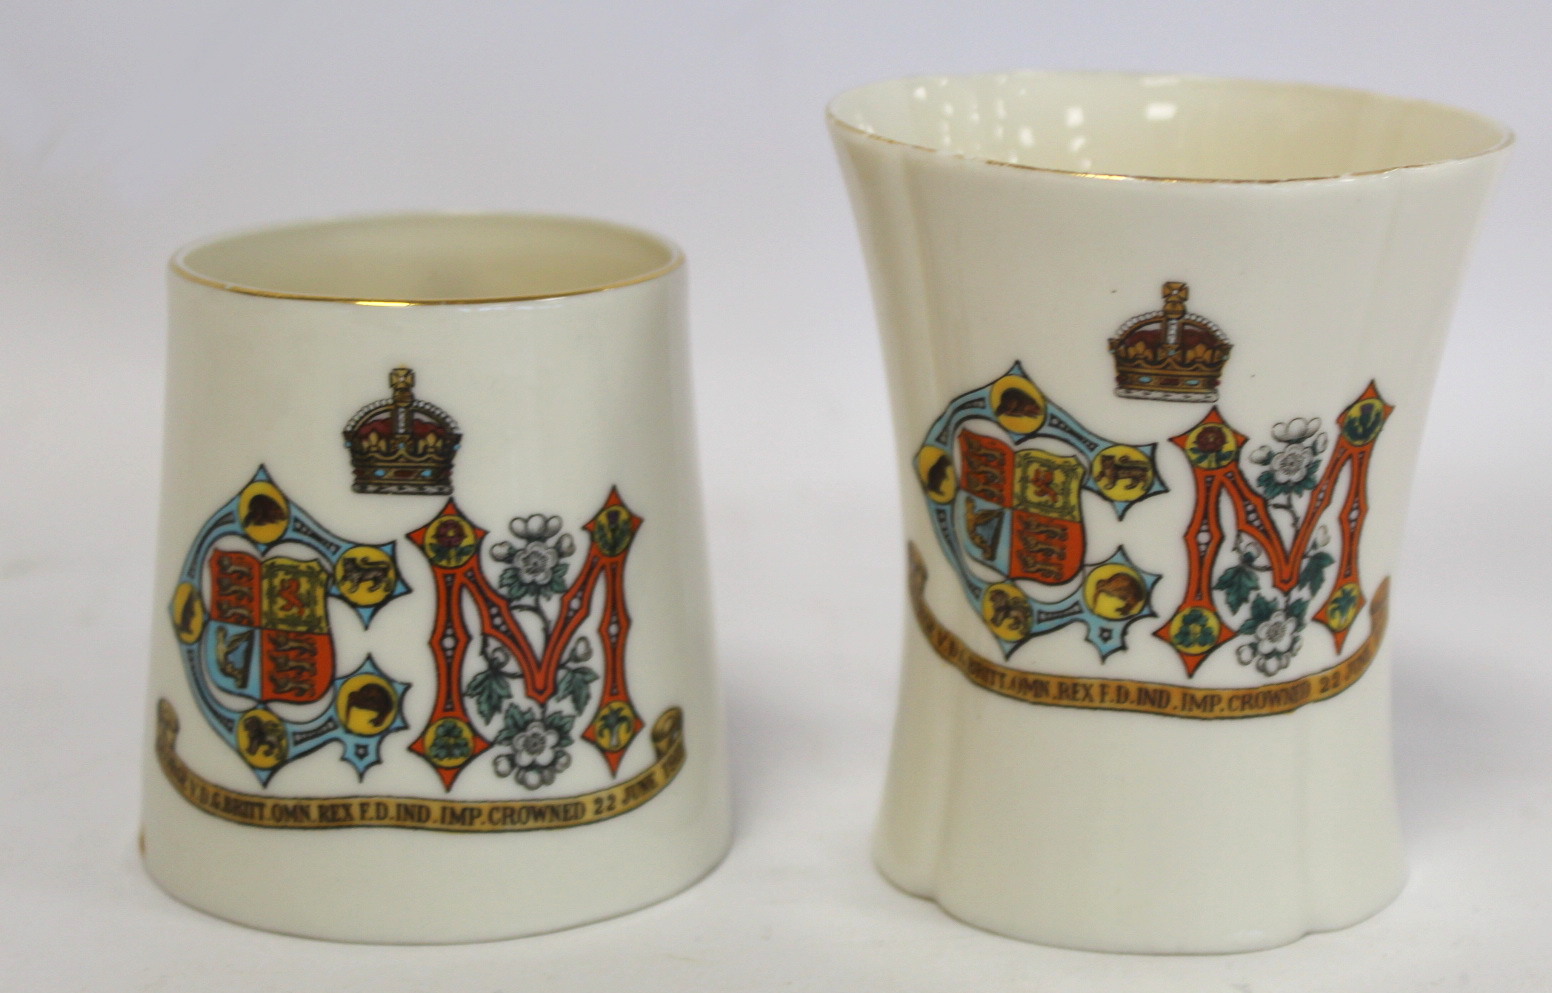 Four pieces of Goss commemorative ware for the Coronation of King George V and Queen Mary 1911, - Image 4 of 12